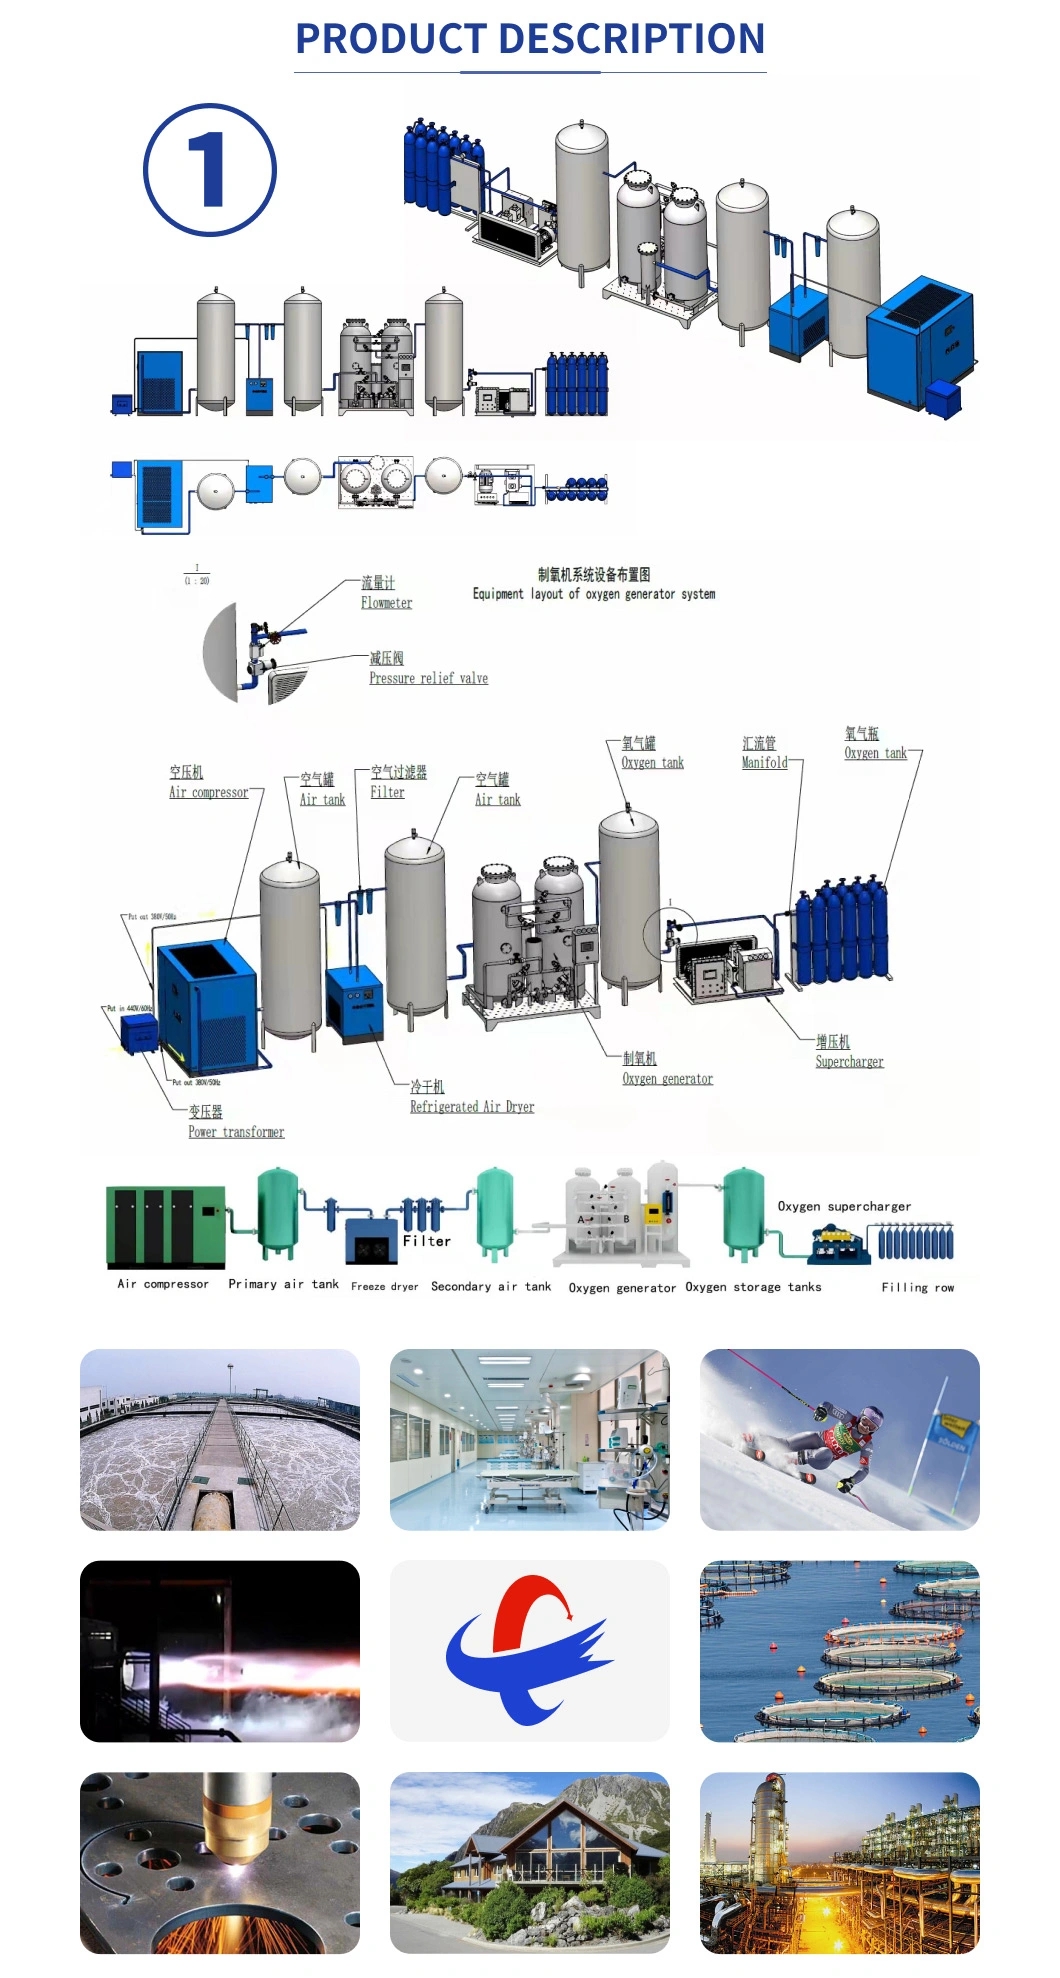 China-Made-High-Purity-Oxygen-Generator-Medical-Oxygen-Industrial-Oxygen.webp